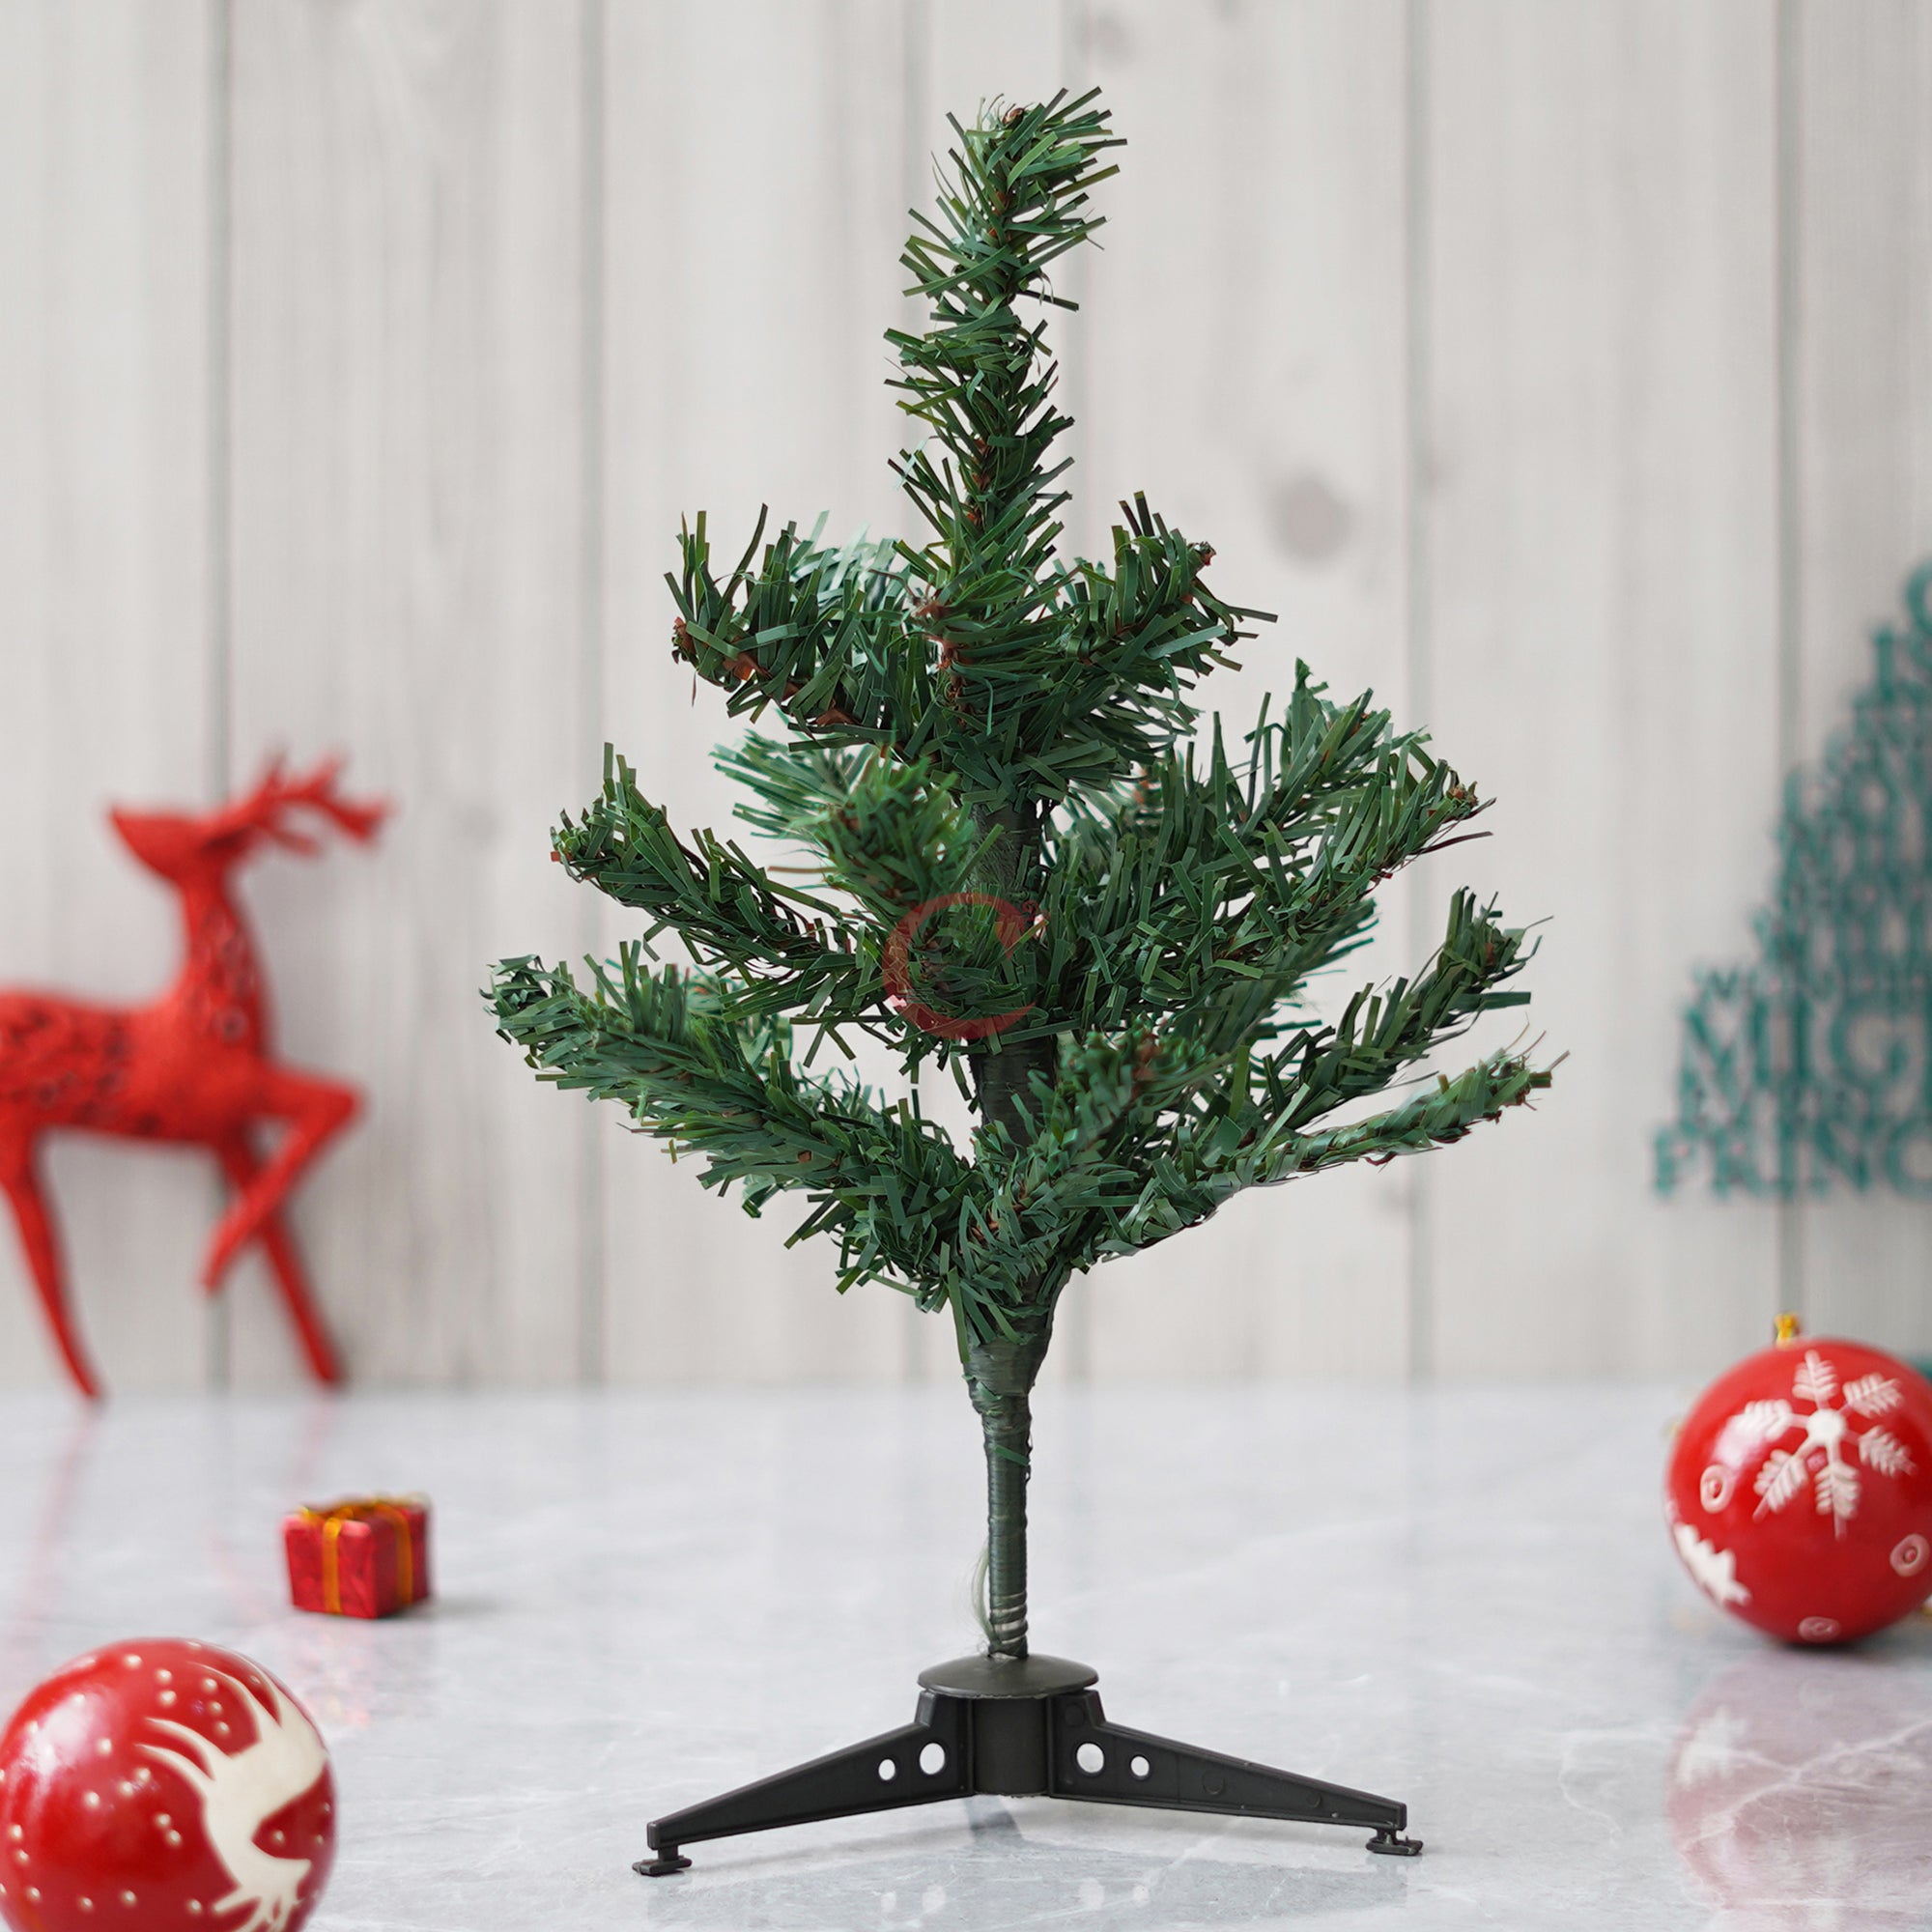 eCraftIndia 1 Feet Green Artificial Christmas Tree Xmas Pine Tree with Metal Stand - Xmas Tree for Indoor, Outdoor, Home, Living Room, Office, Church Decor - Merry Christmas Decoration Item 1